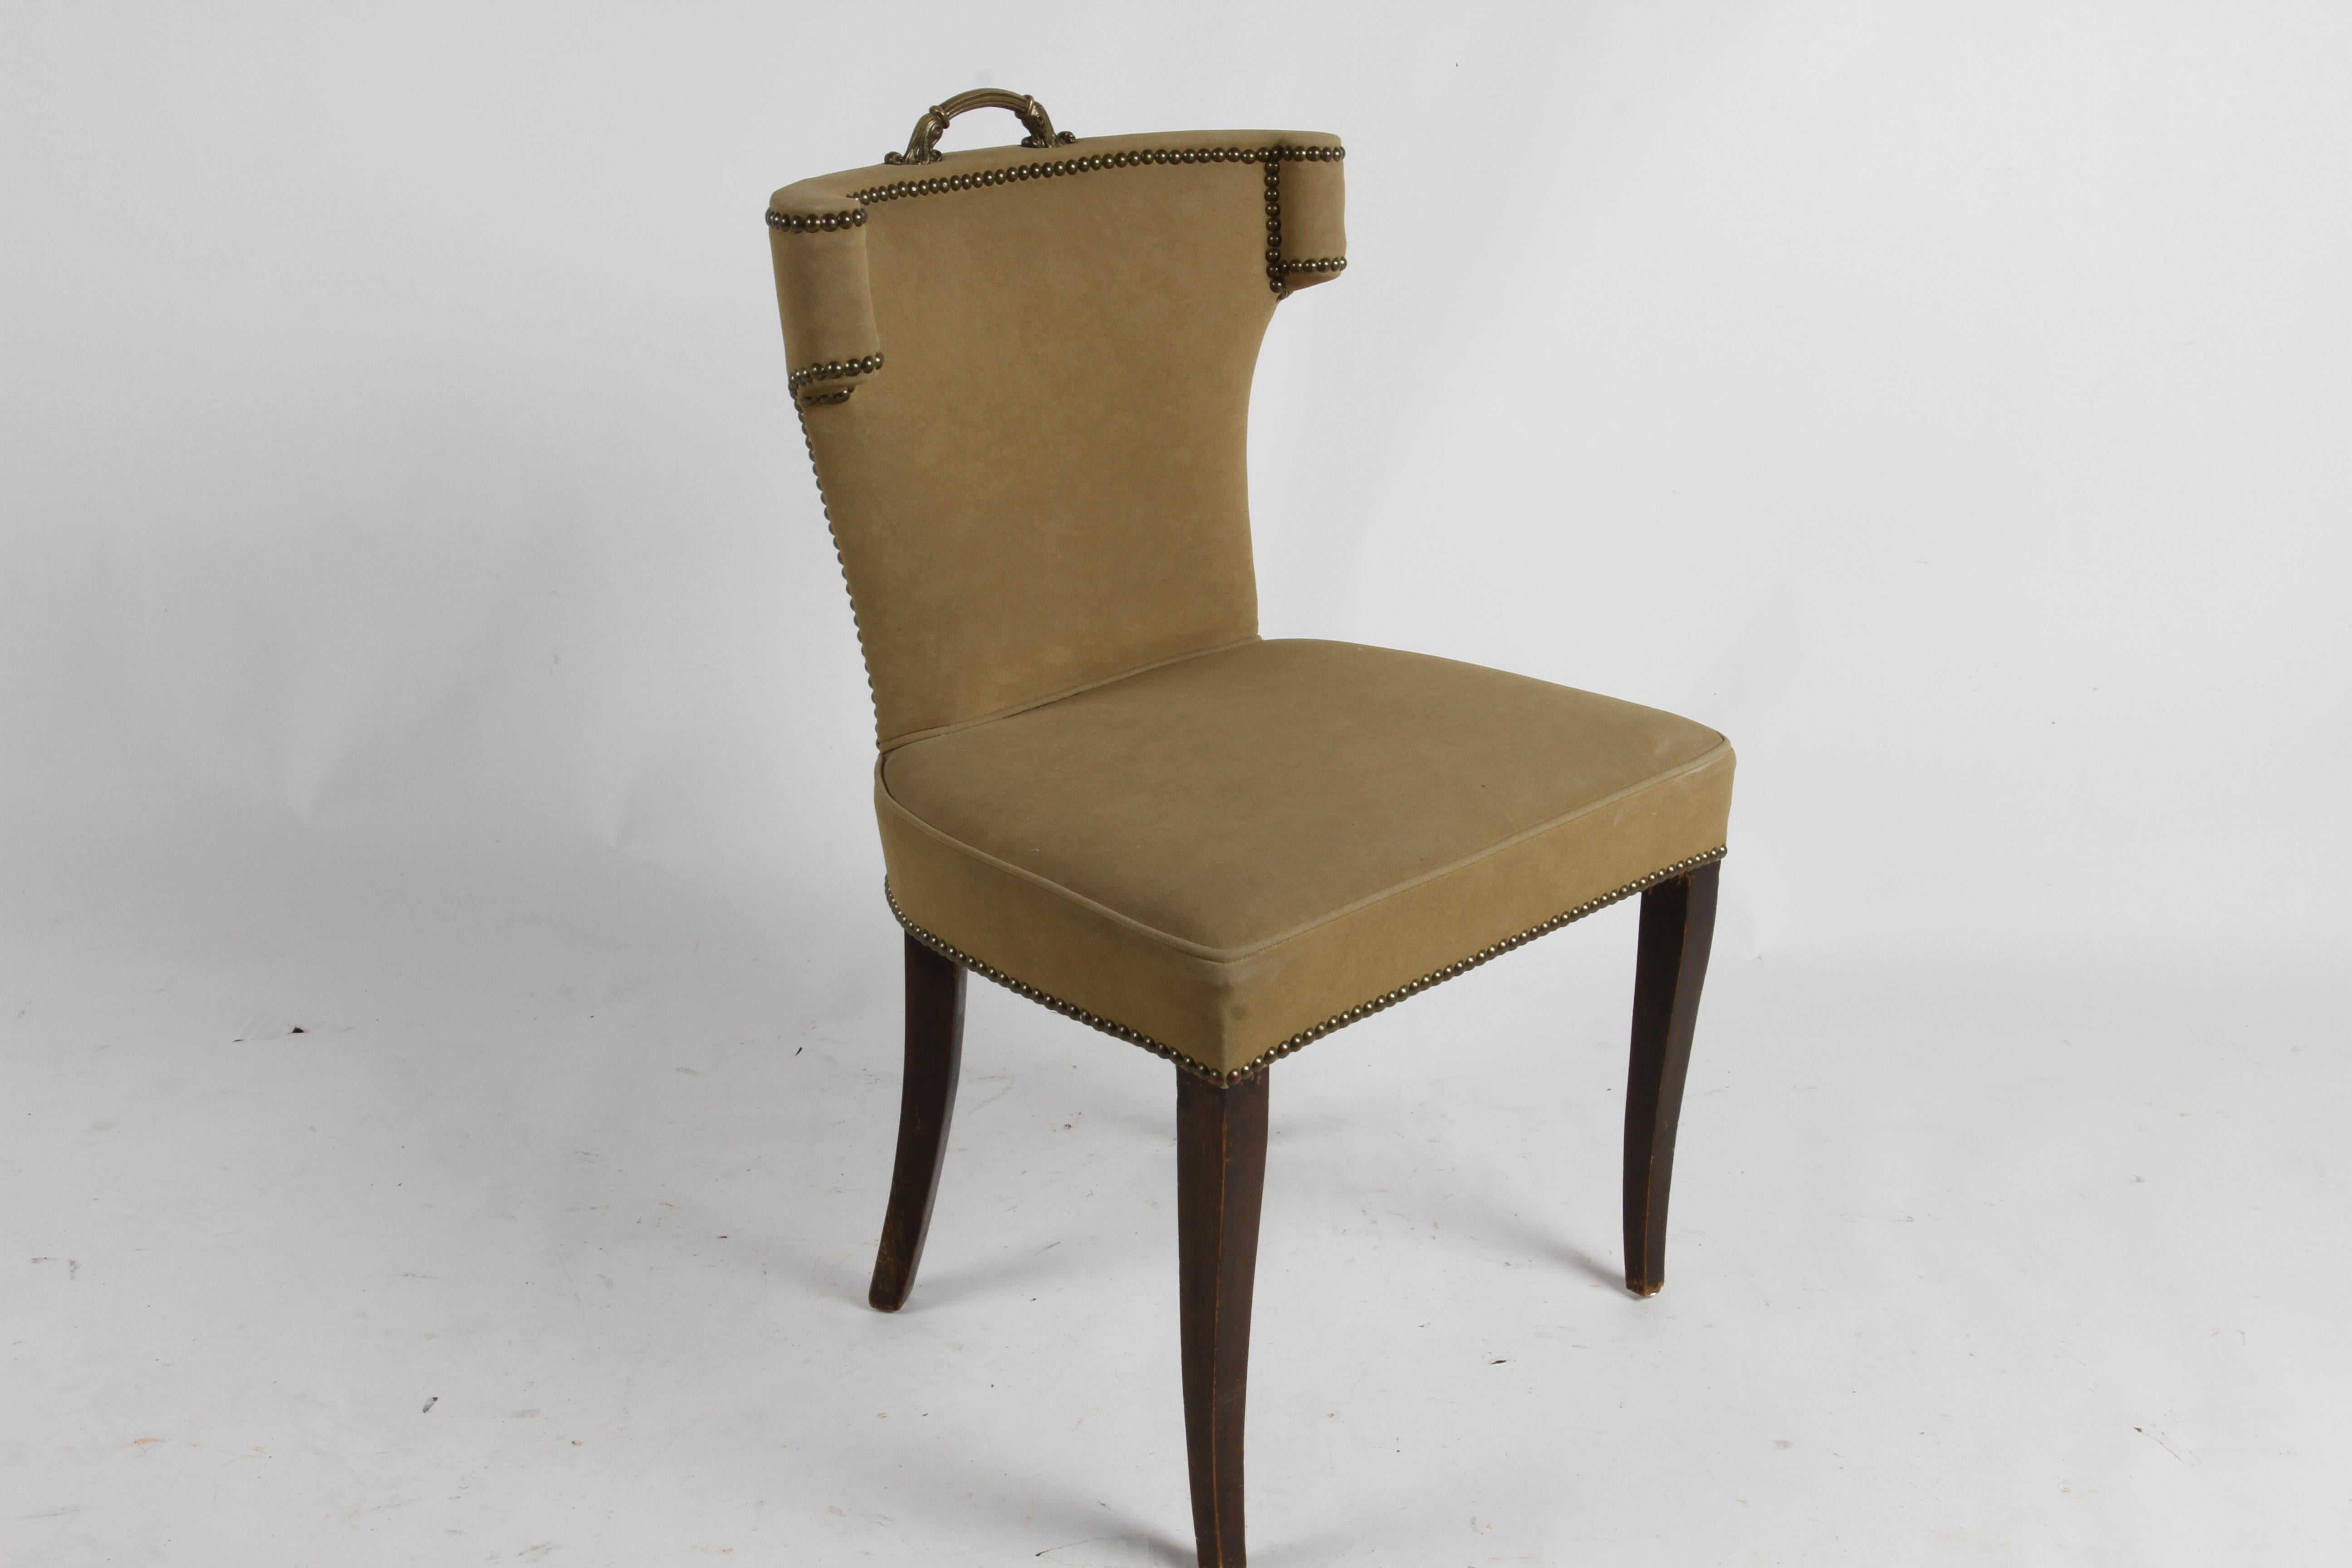 Mid-20th Century 1940s Hollywood Regency Tan Suede Desk Chair with Brass Handle & Nailhead Trim For Sale